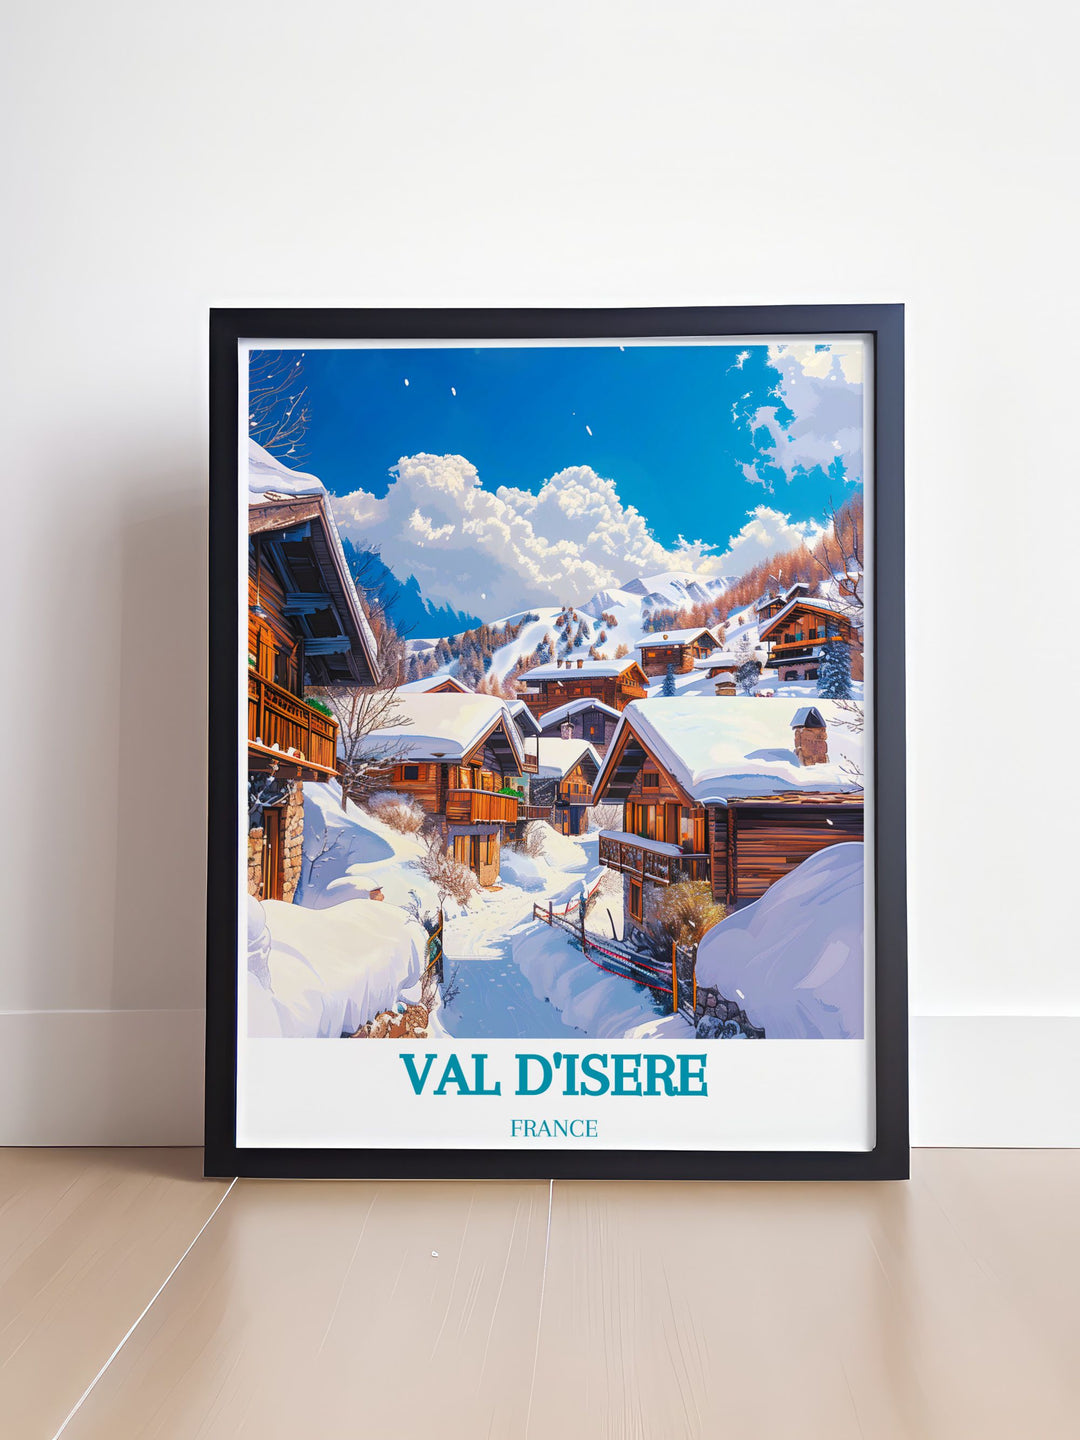 Embrace the cultural richness of the French Alps through this travel poster, showcasing the lively atmosphere of Val dIseres Old Town.